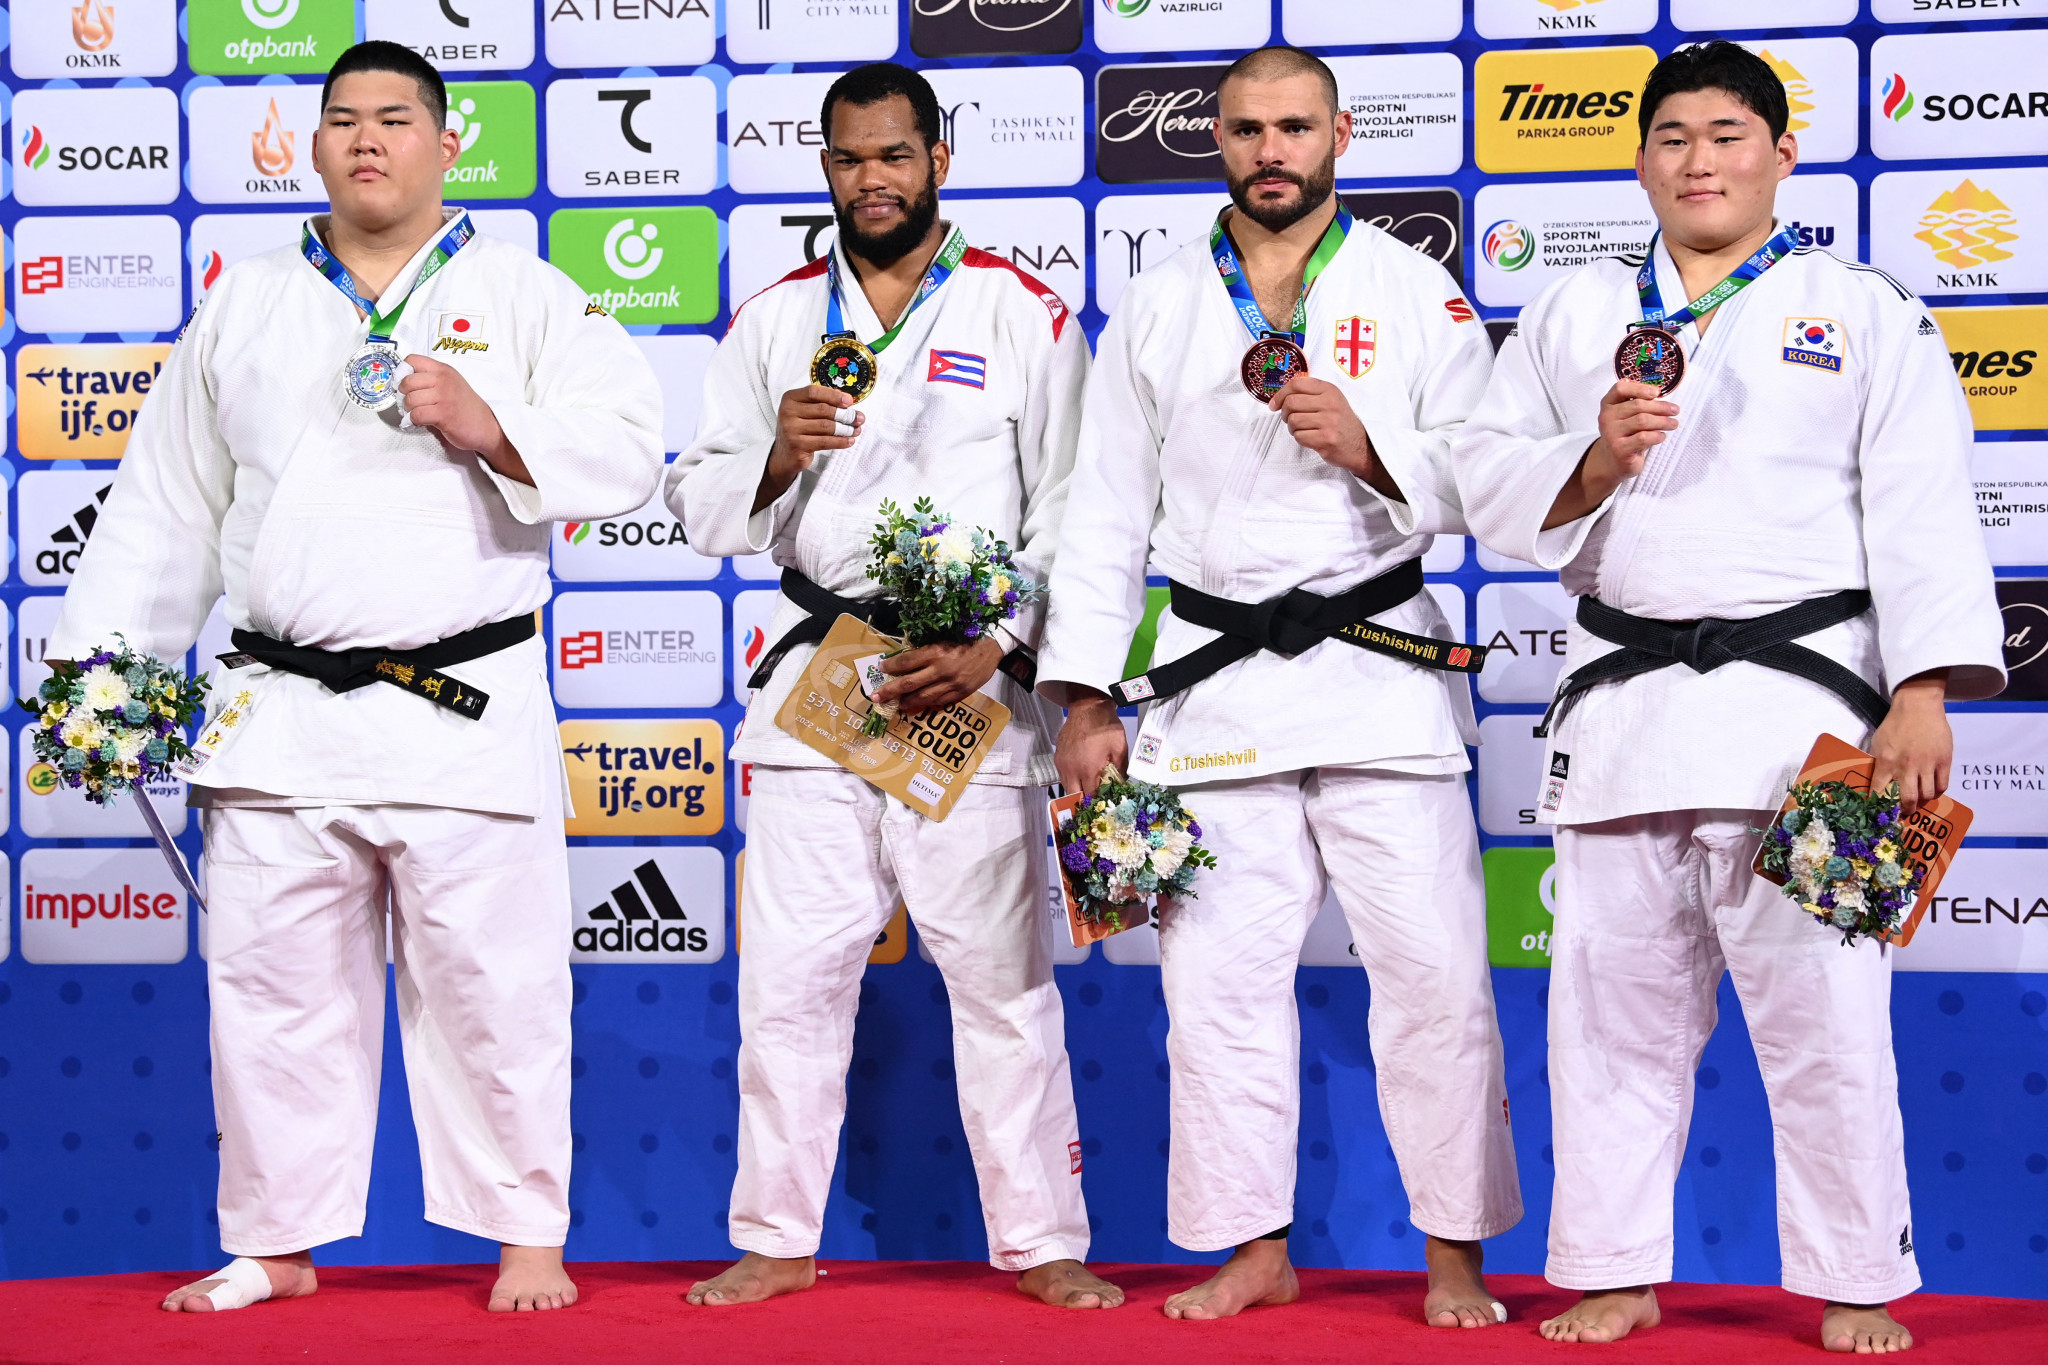 Georgia's Guram Tushishvili, third right, and South Korean Kim Min-jong, right, made up the rest of the podium after winning the bronze-medal matches ©Getty Images